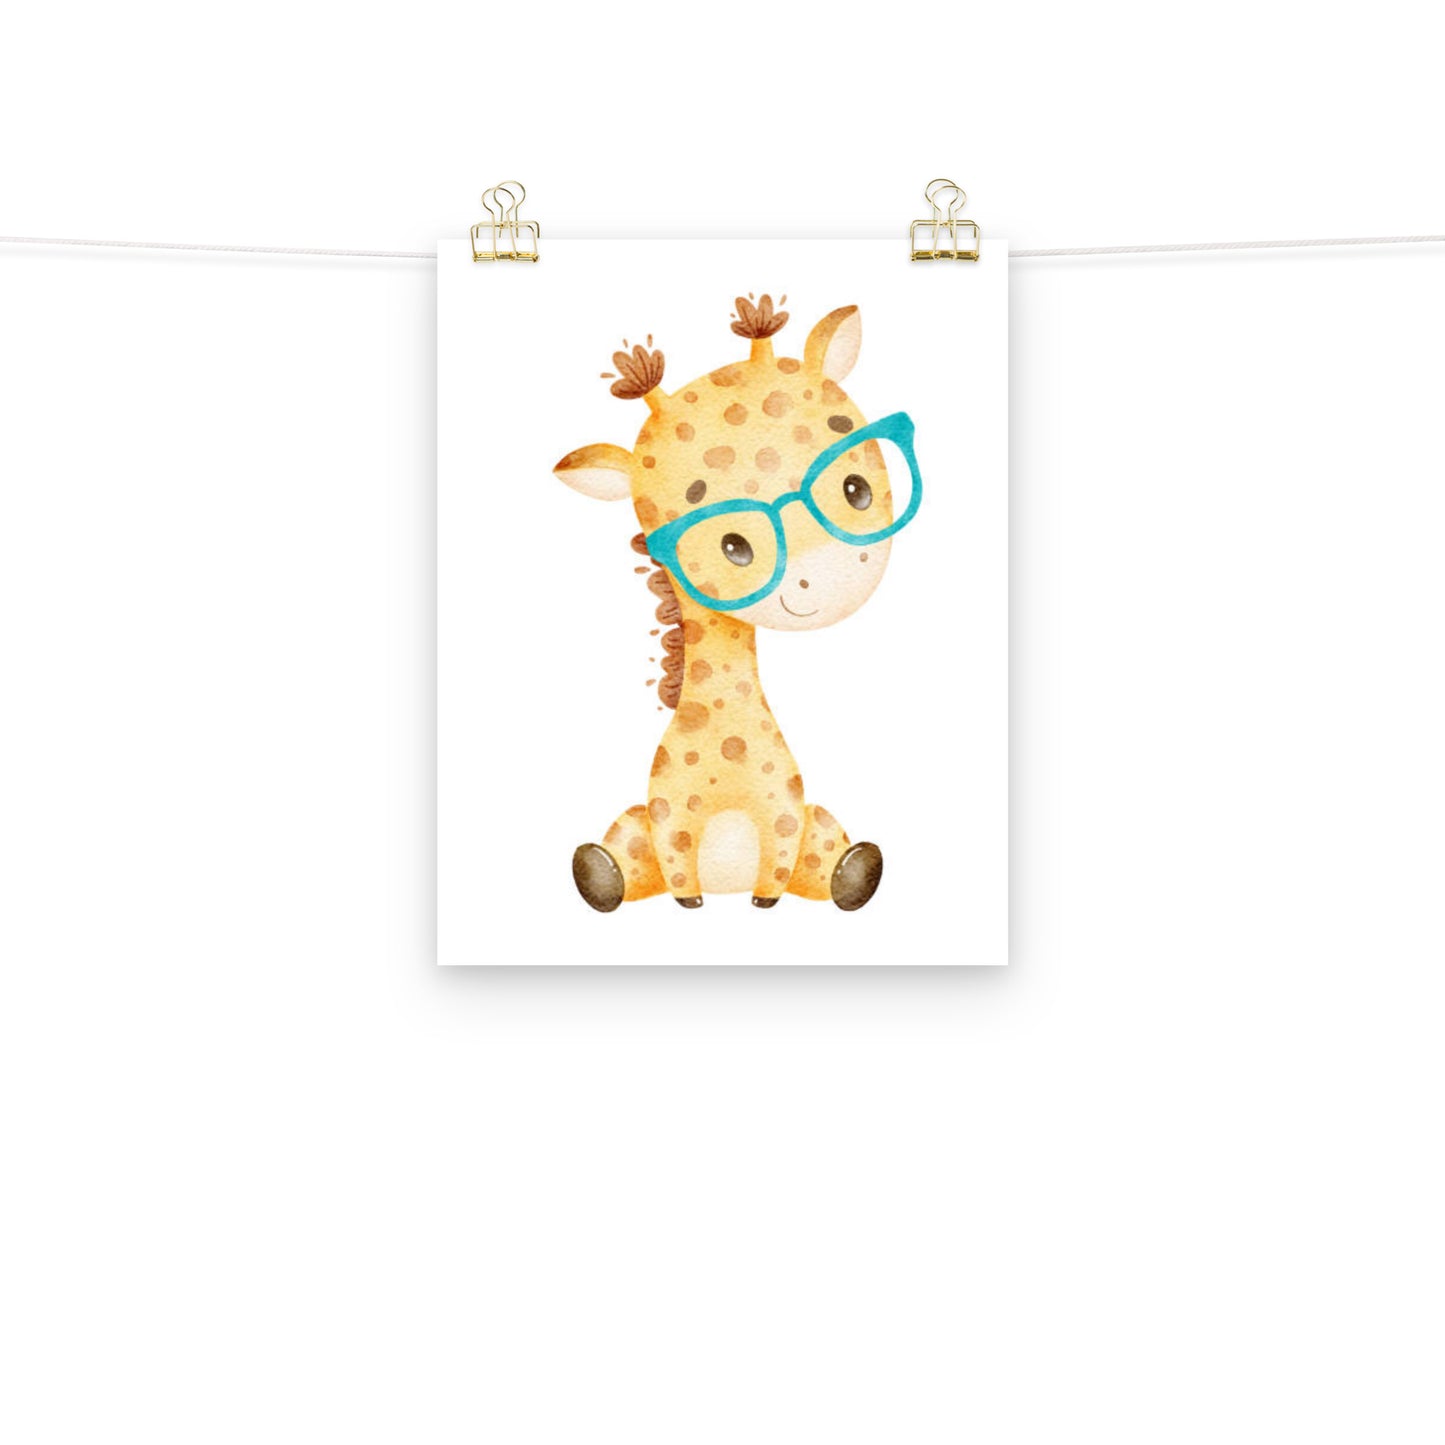 Baby Giraffe with Glasses Poster